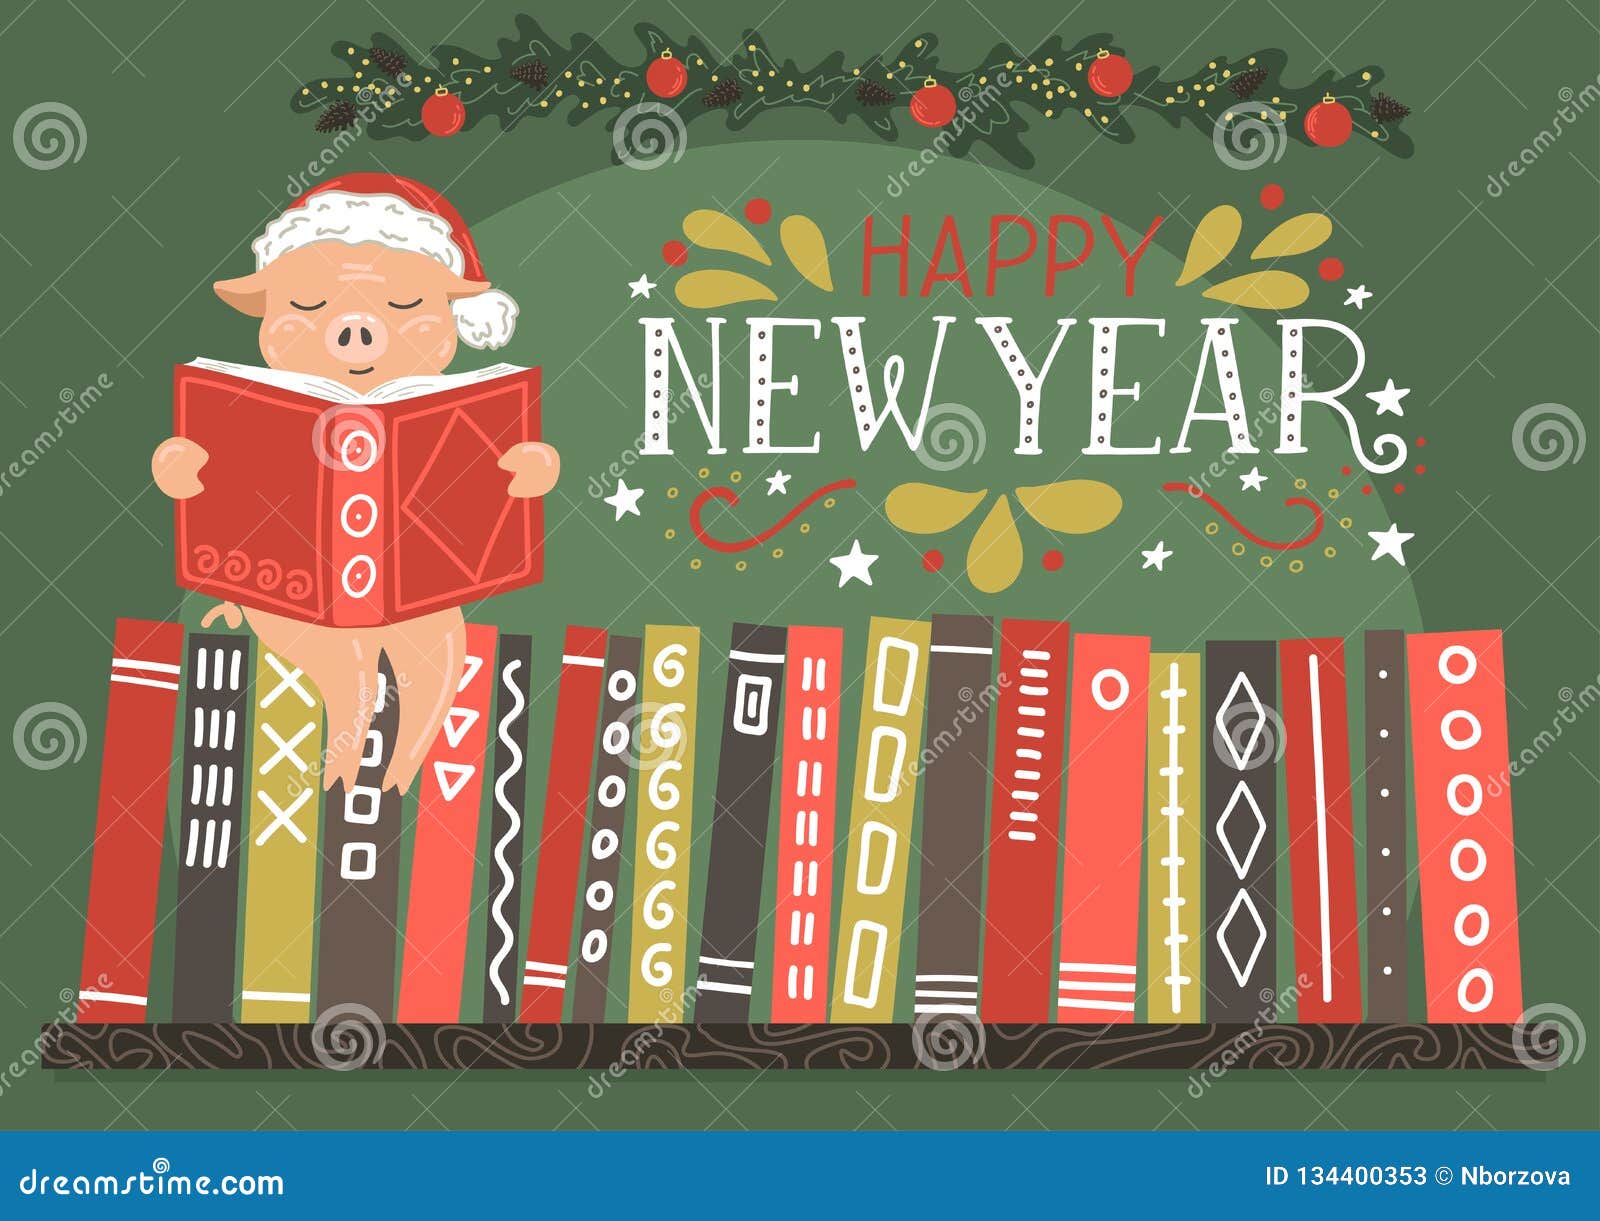 Pig in red hat reading book on bookshelf with lettering `Happy New Year`.